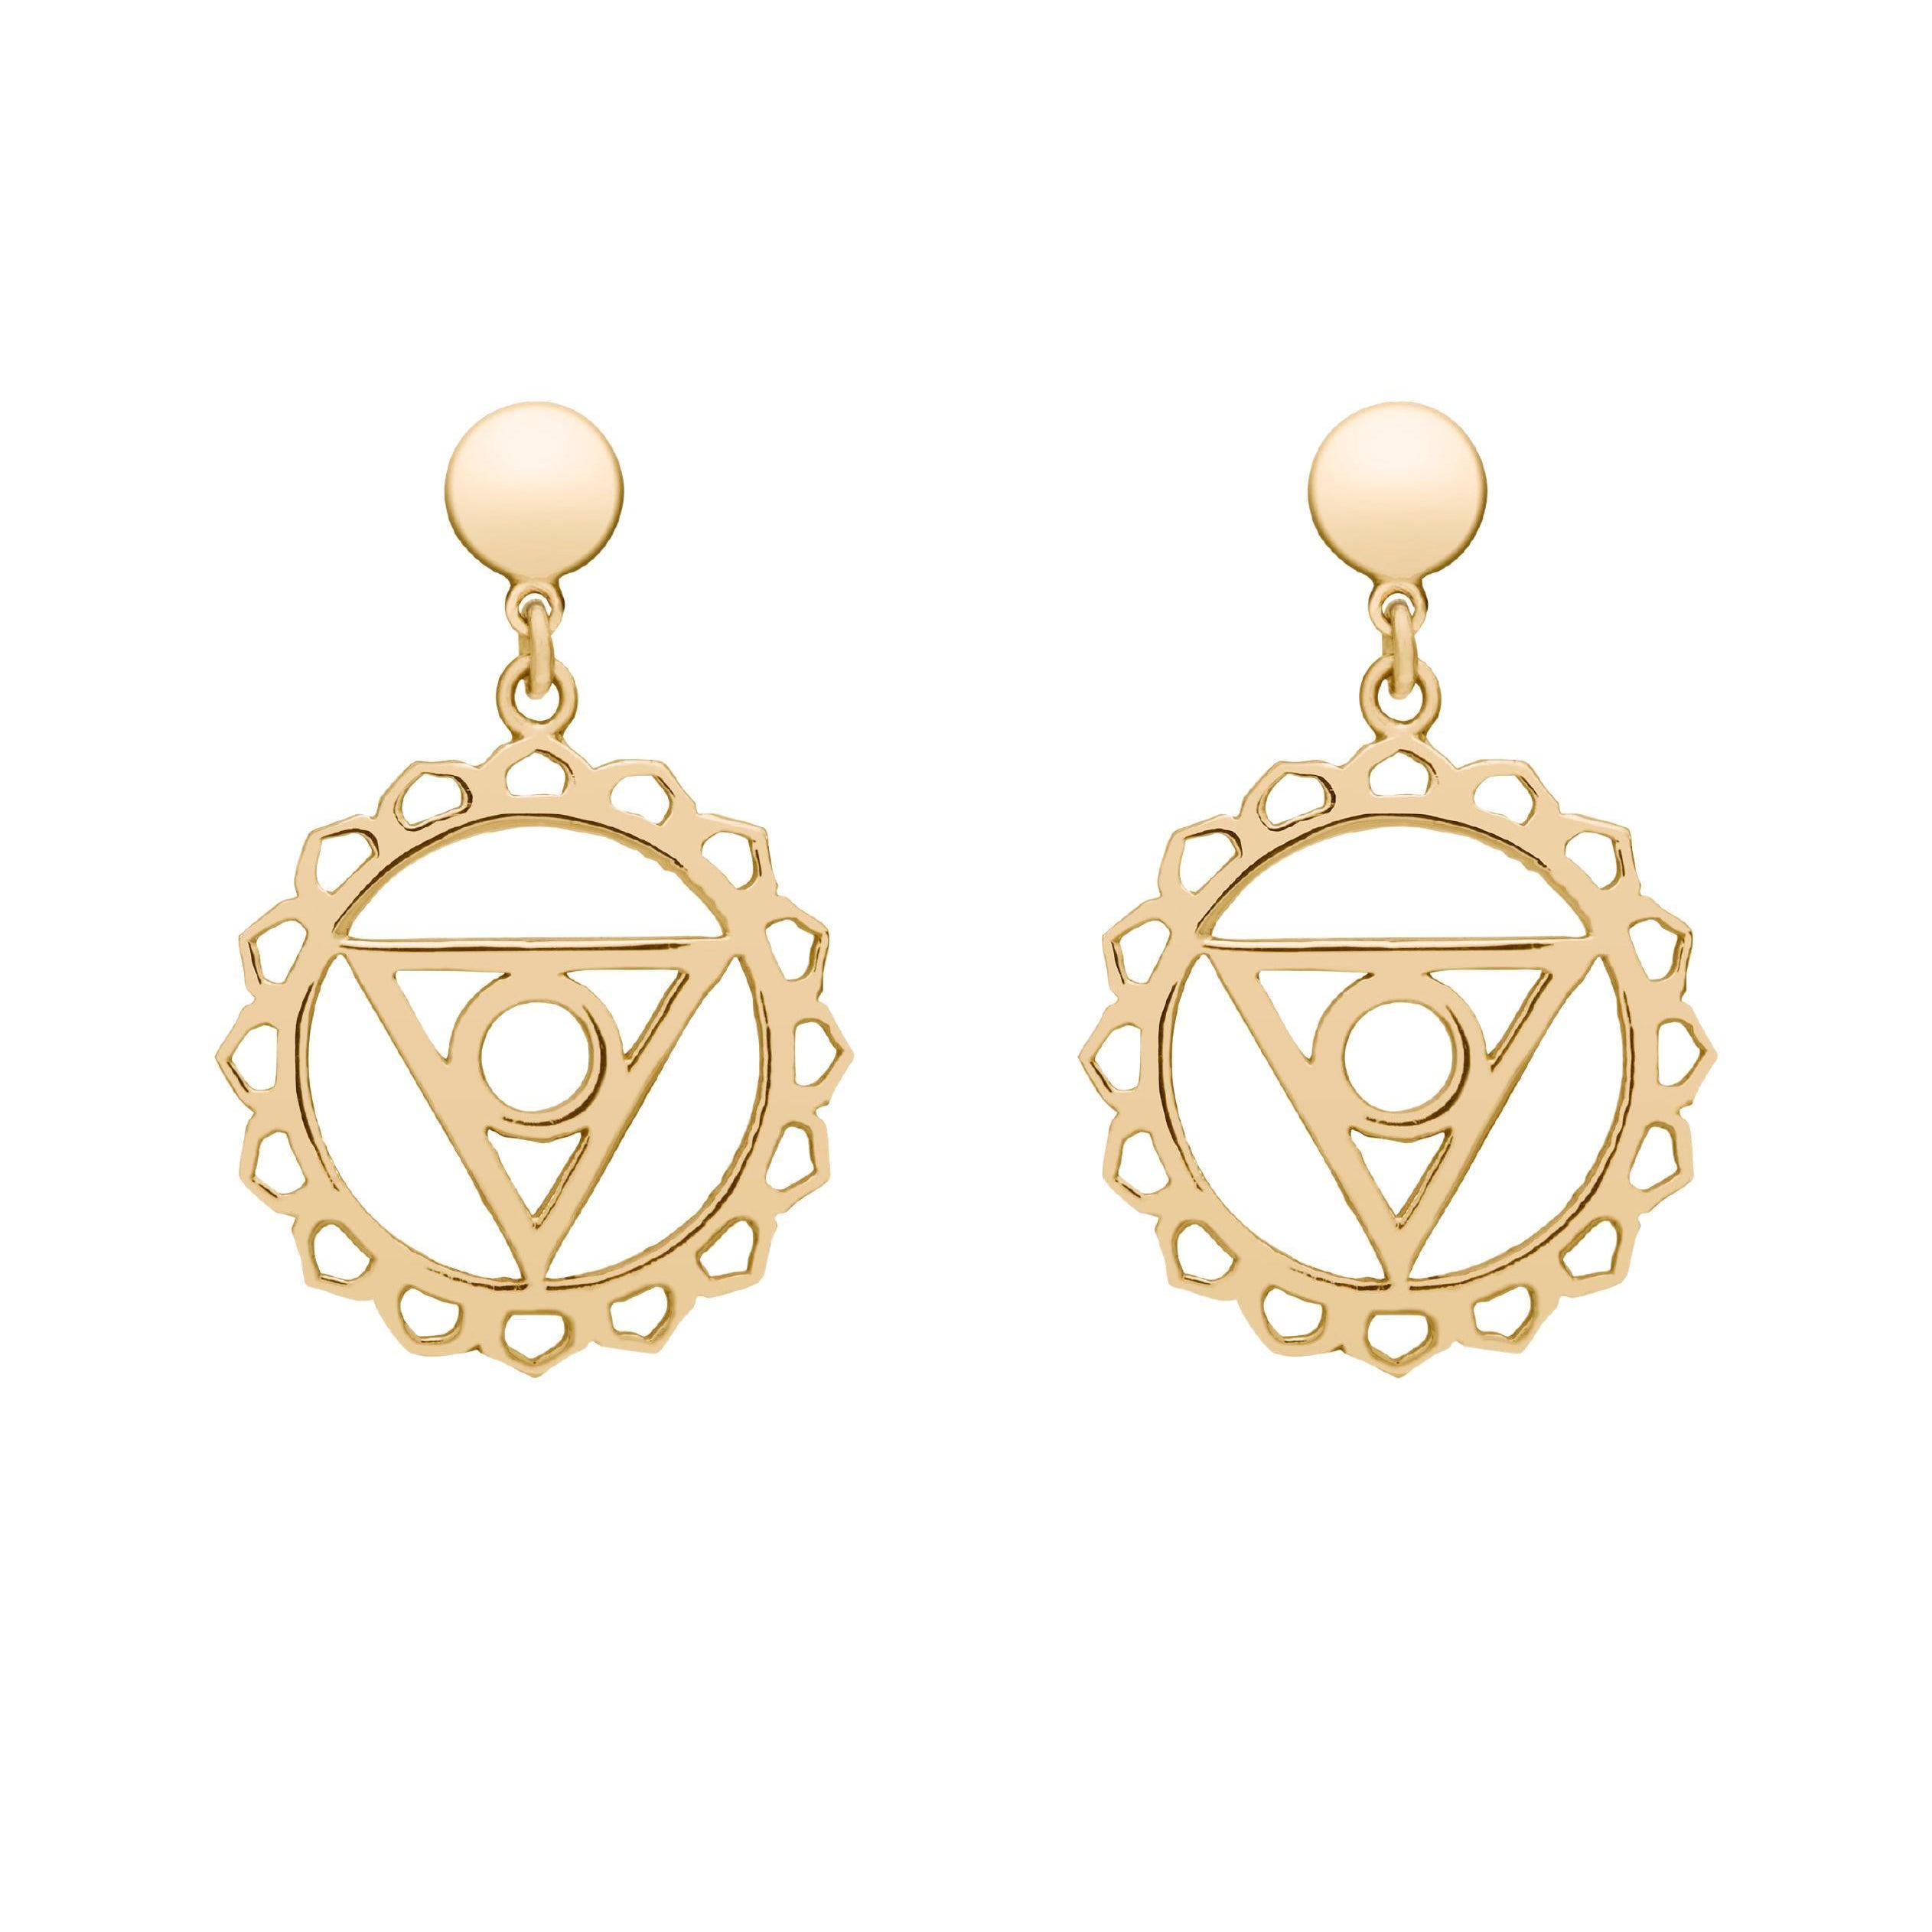 Handcrafted Drop Earrings with Vissuddha Throat Chakra in 14Kt Gold Gift for Her For Sale